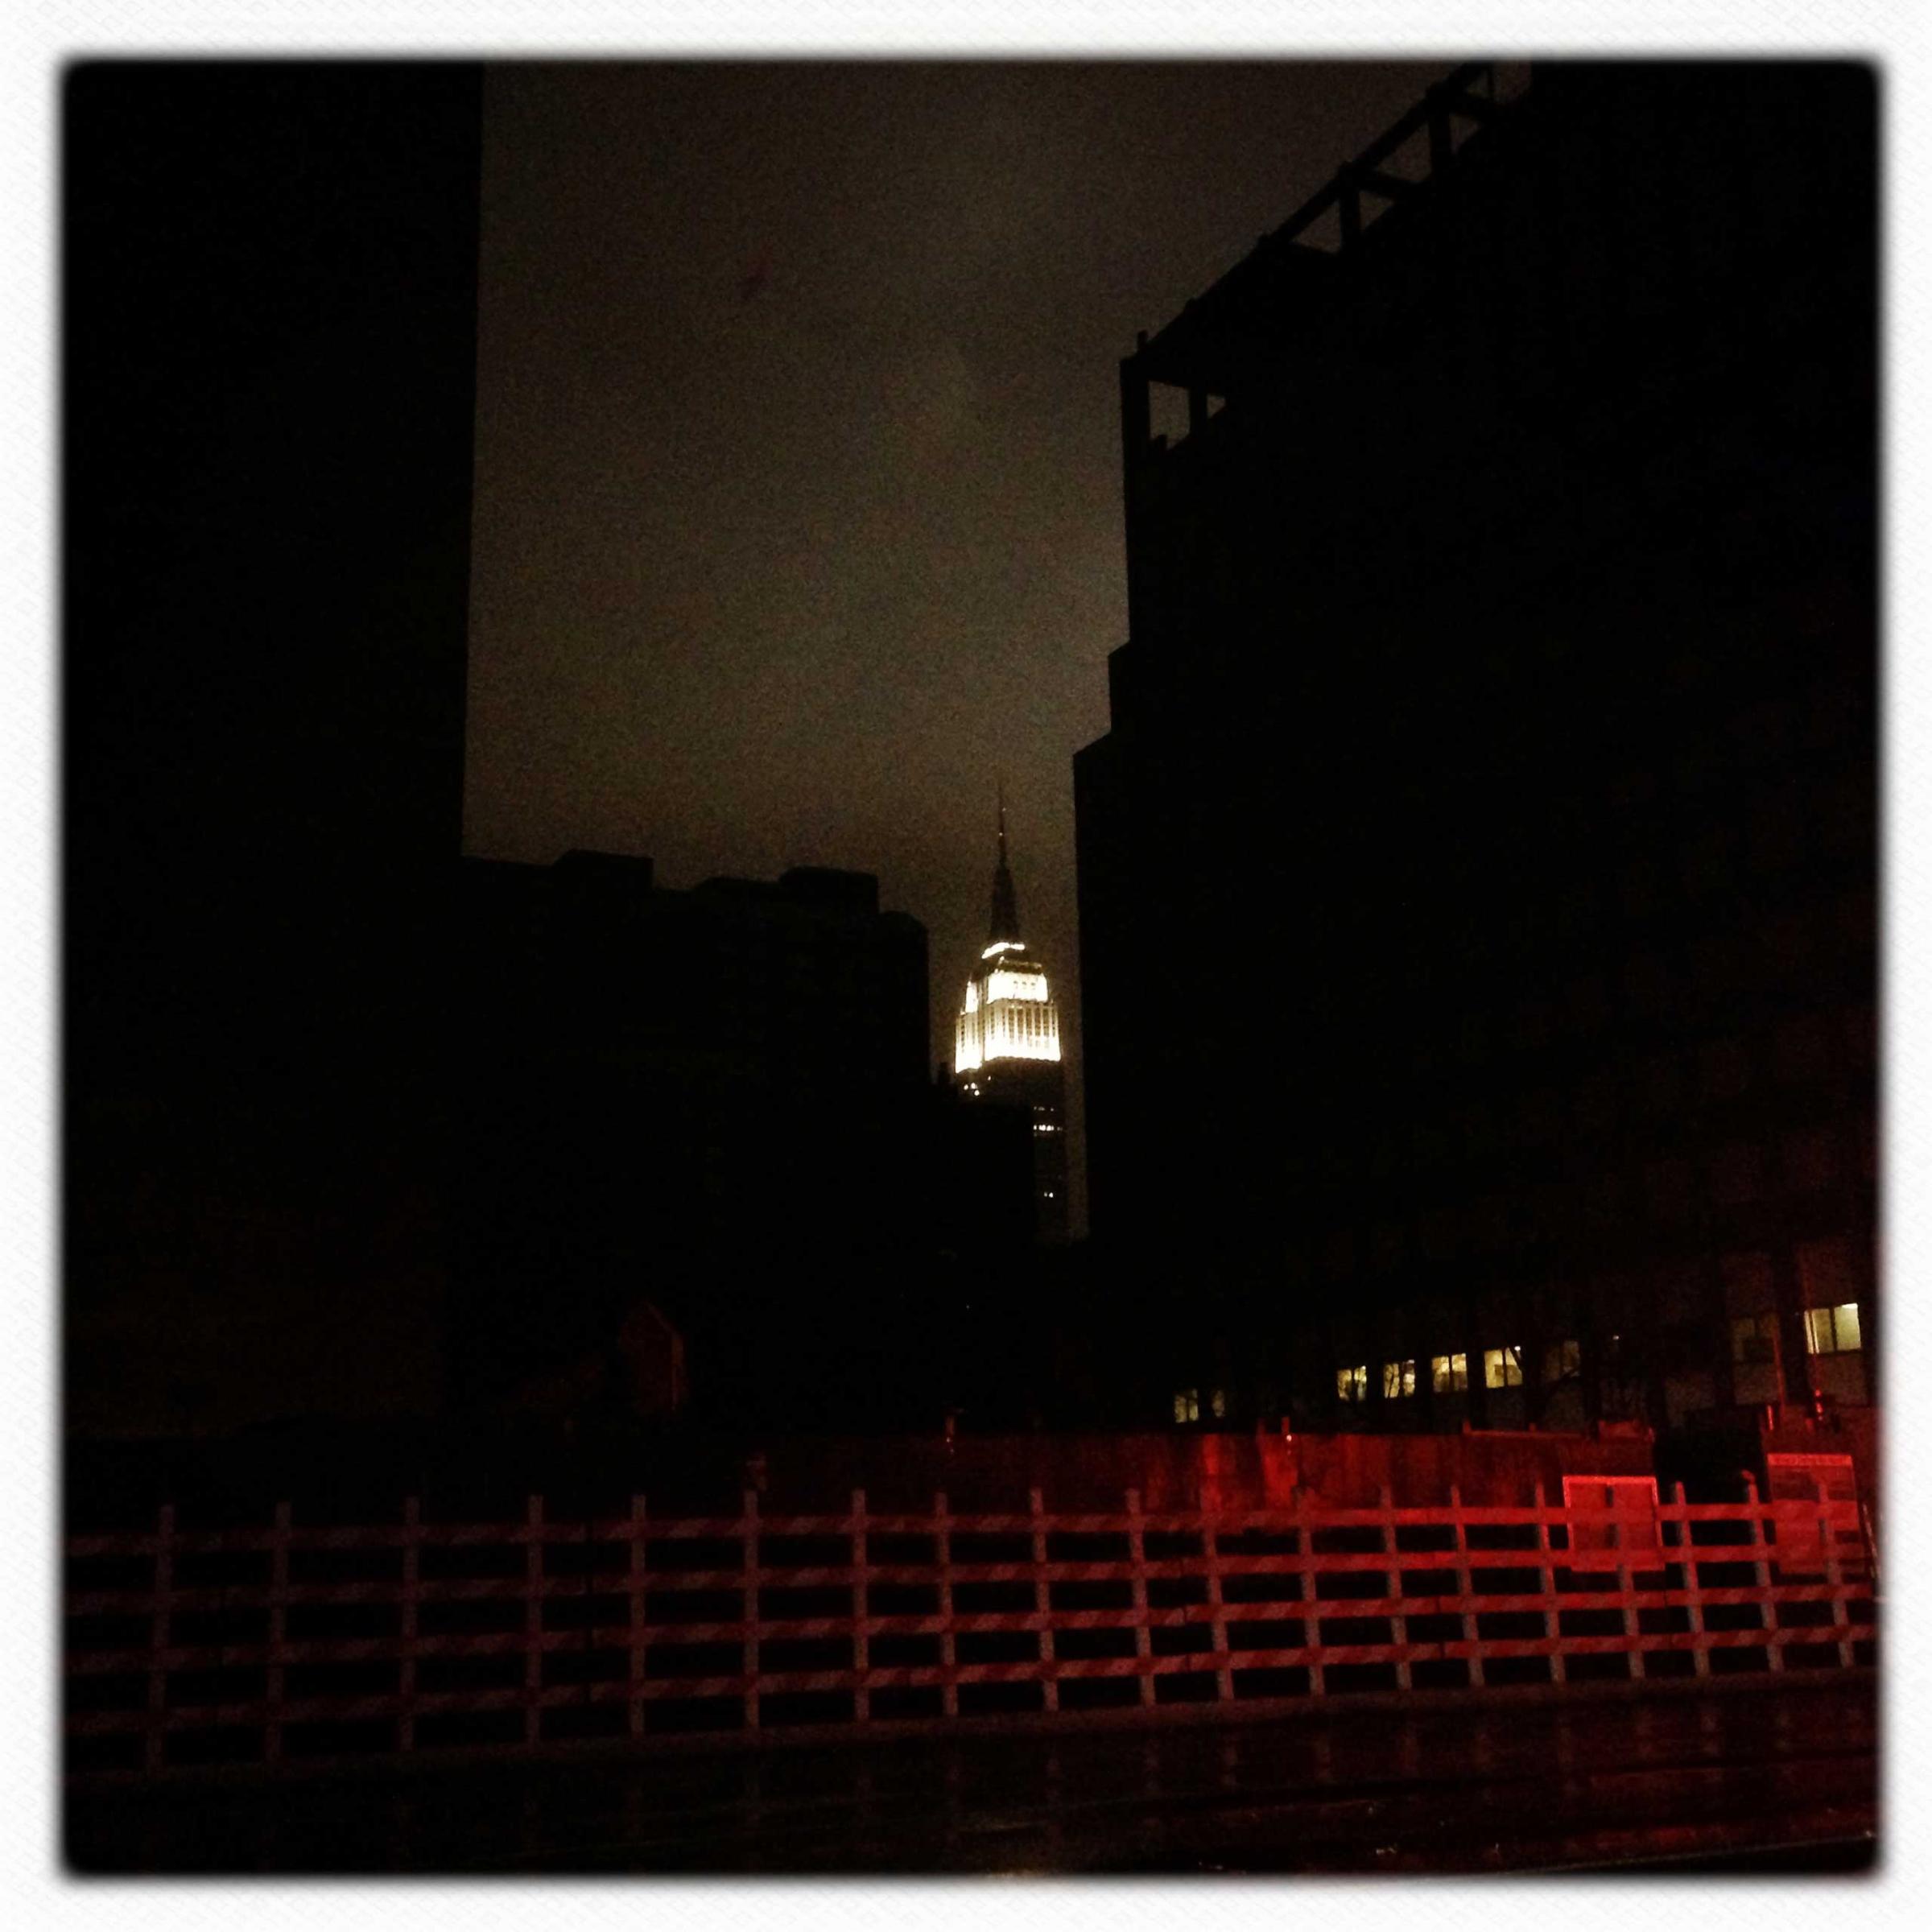 With much of lower and midtown Manhattan in the dark, the Empire State Building lights up the sky